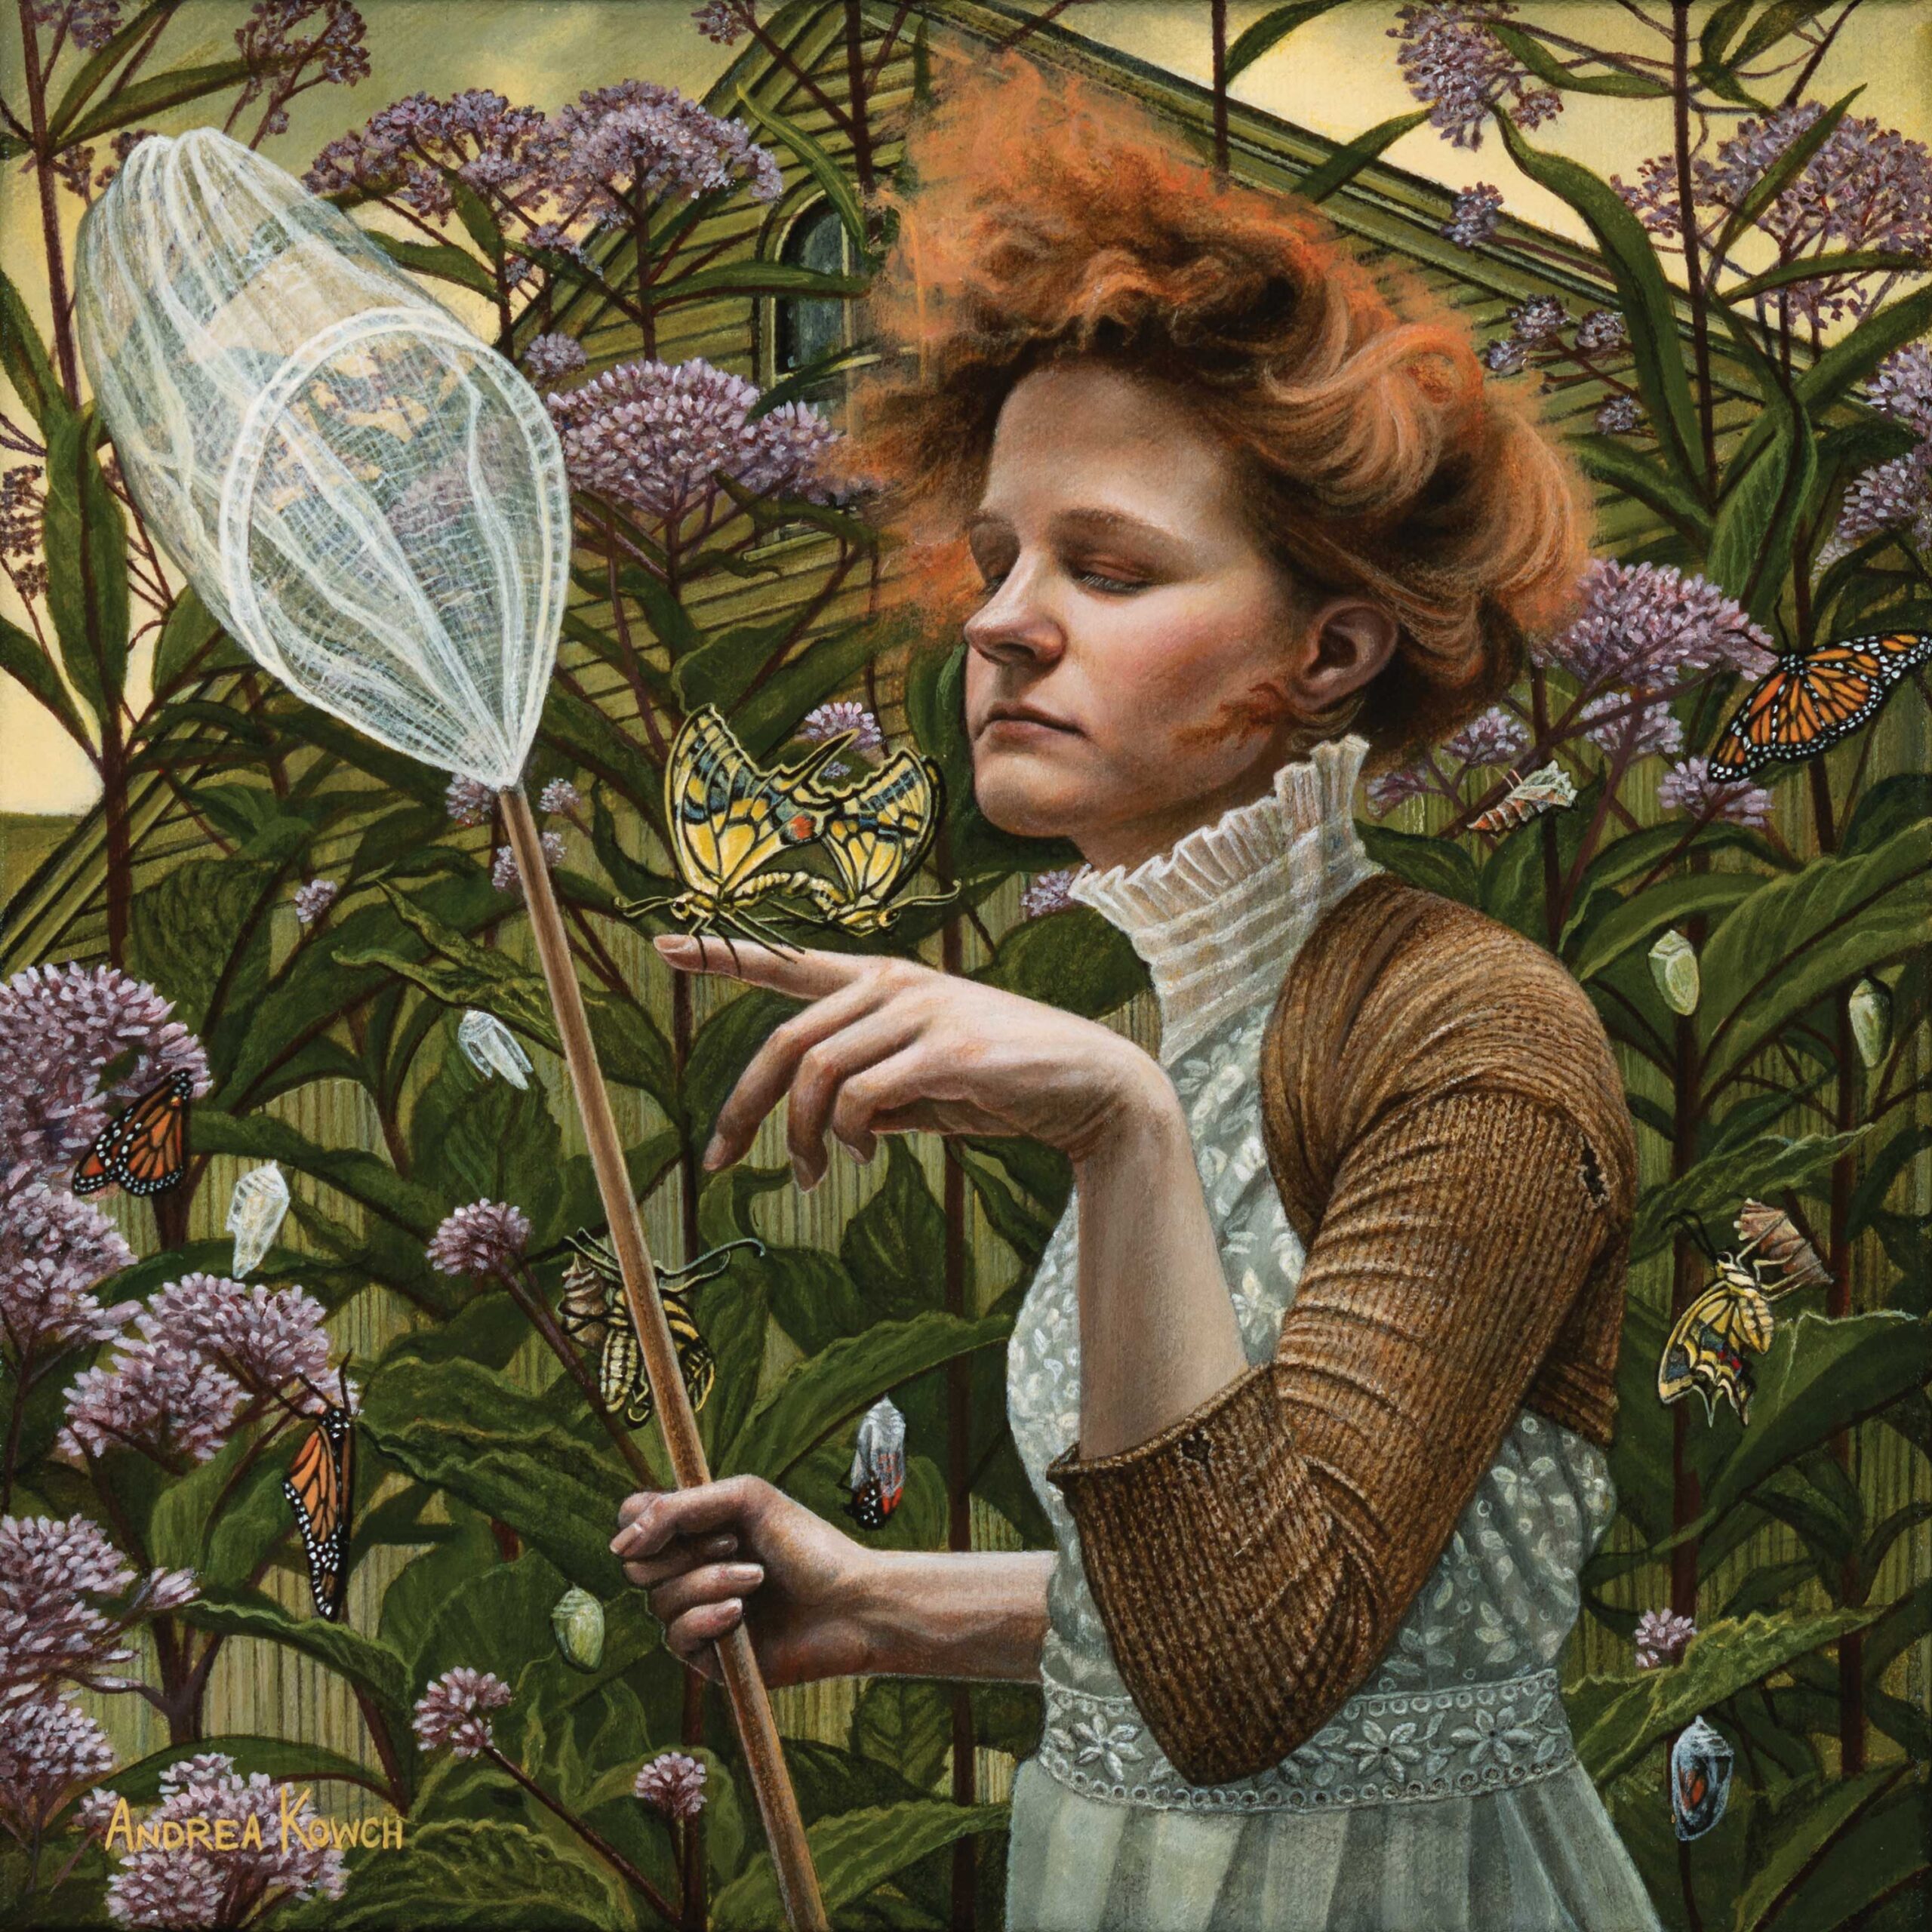 contemporary realism narrative art - Andrea Kowch, "Expectation," 2019, acrylic on canvas, 10 x 10 in., private collection